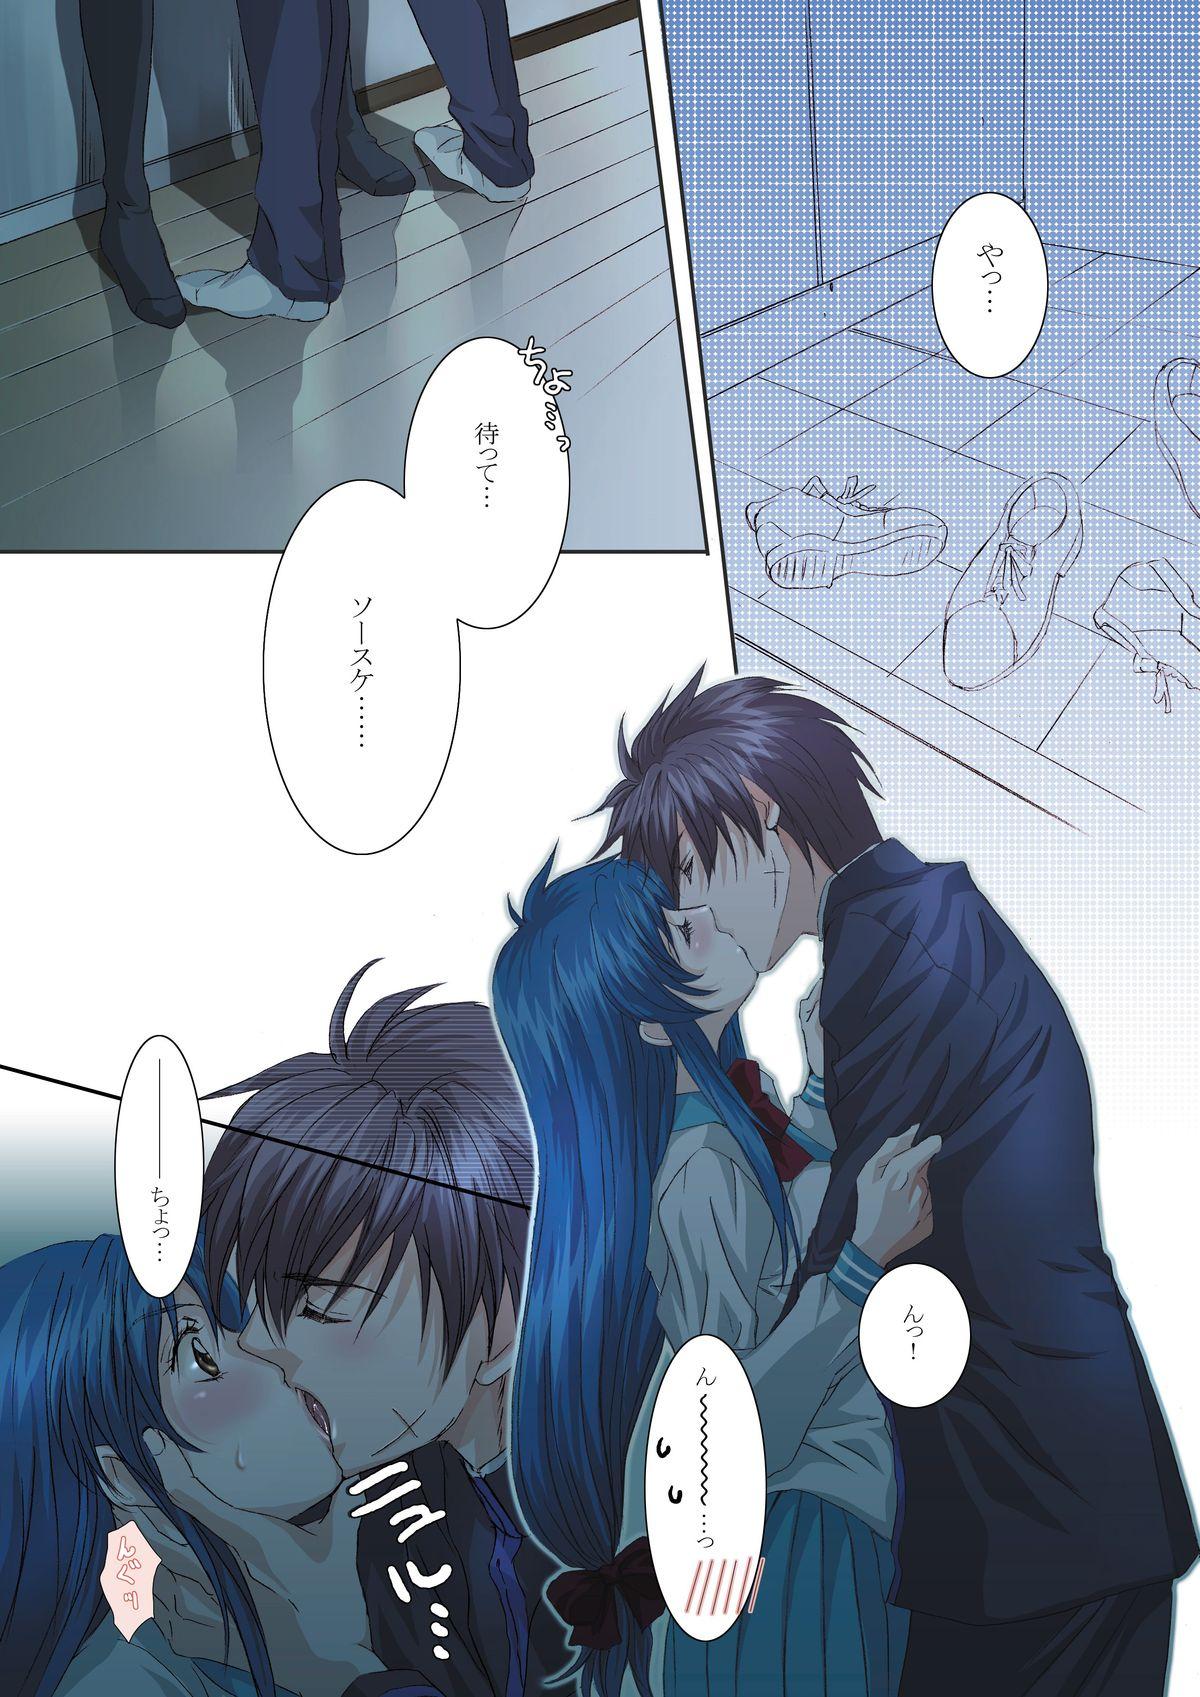 Grosso Anjel Seven A7 - Full metal panic Lesbiansex - Page 5